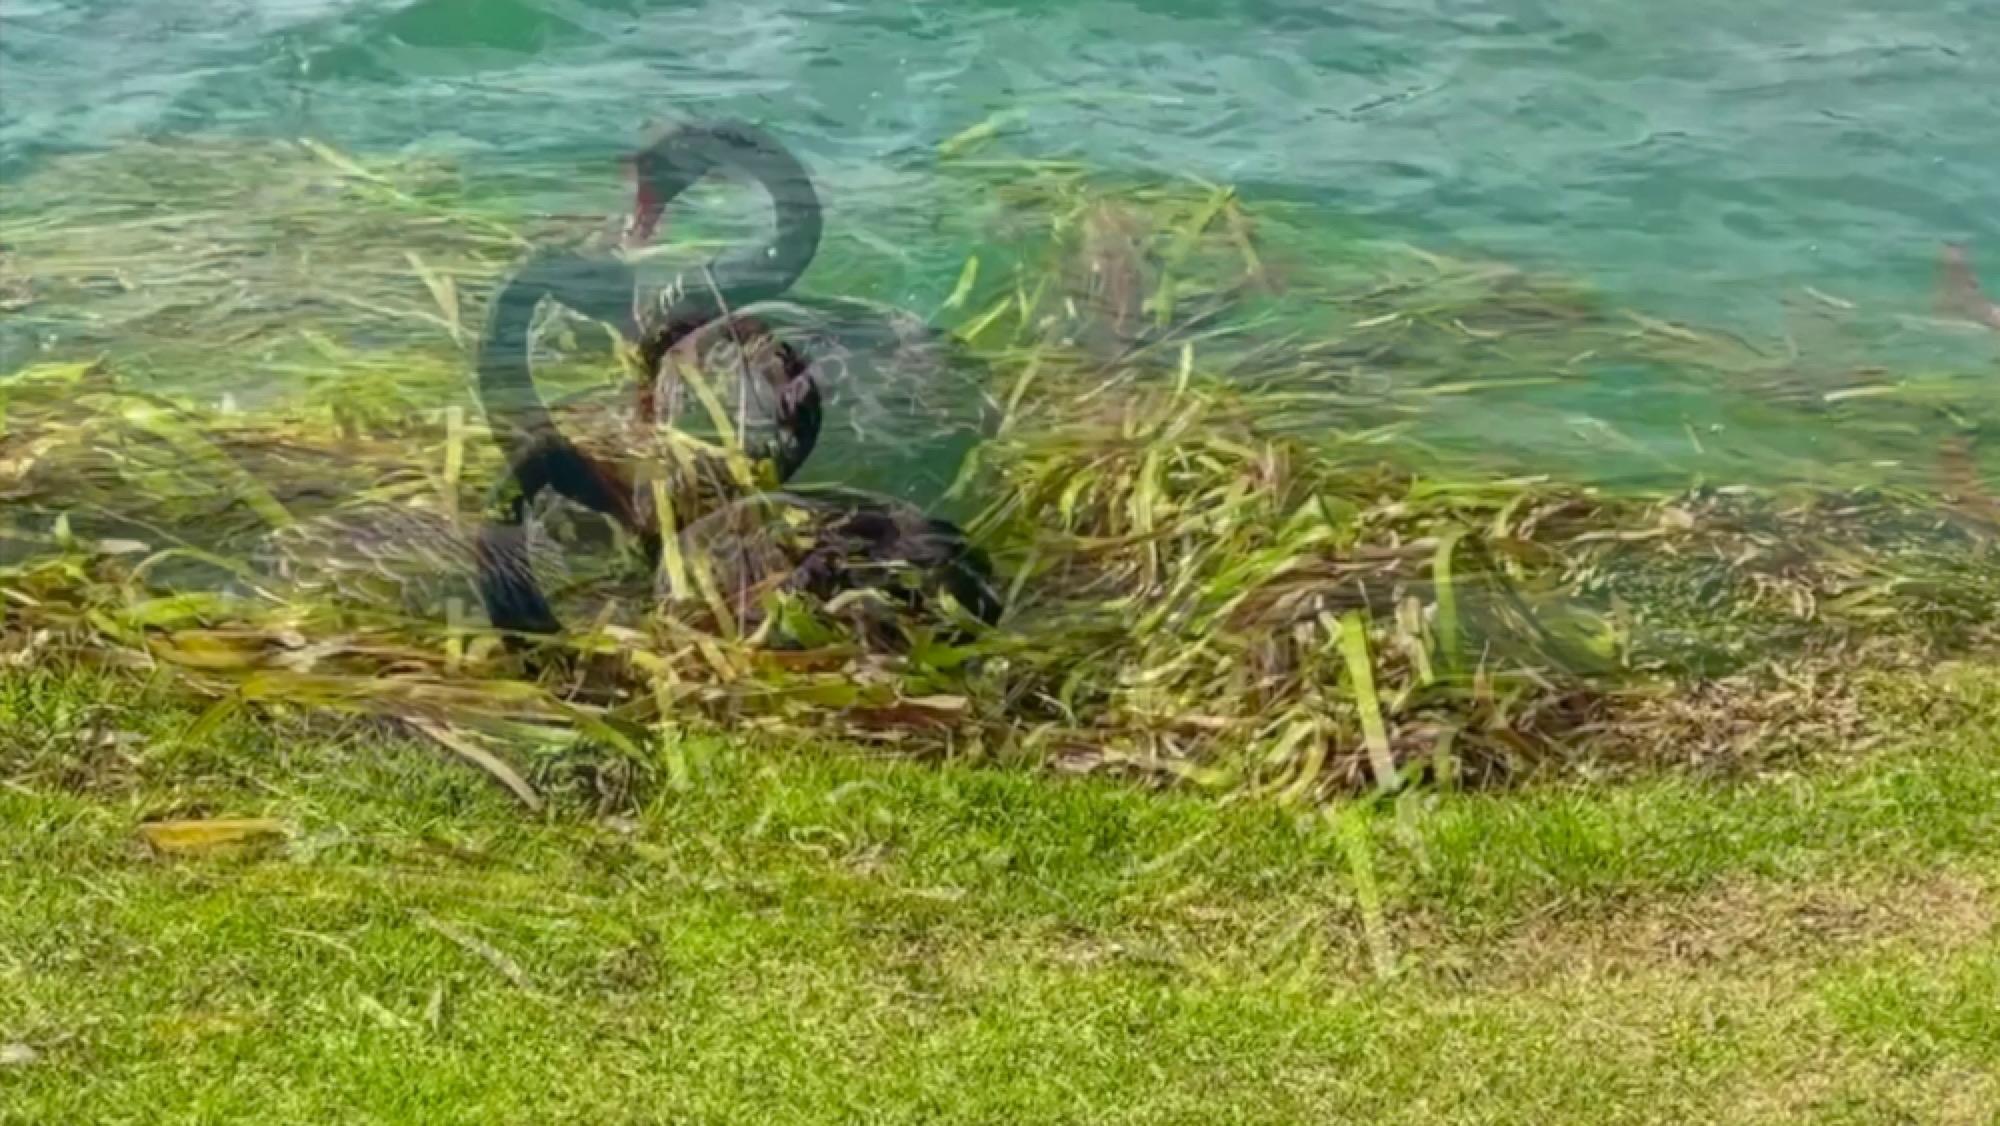 Still from Isabella Besen, <em>The Swans I Saw at Albert Park Lake</em>, 2020, video collage, 30 seconds. Courtesy of the artist.